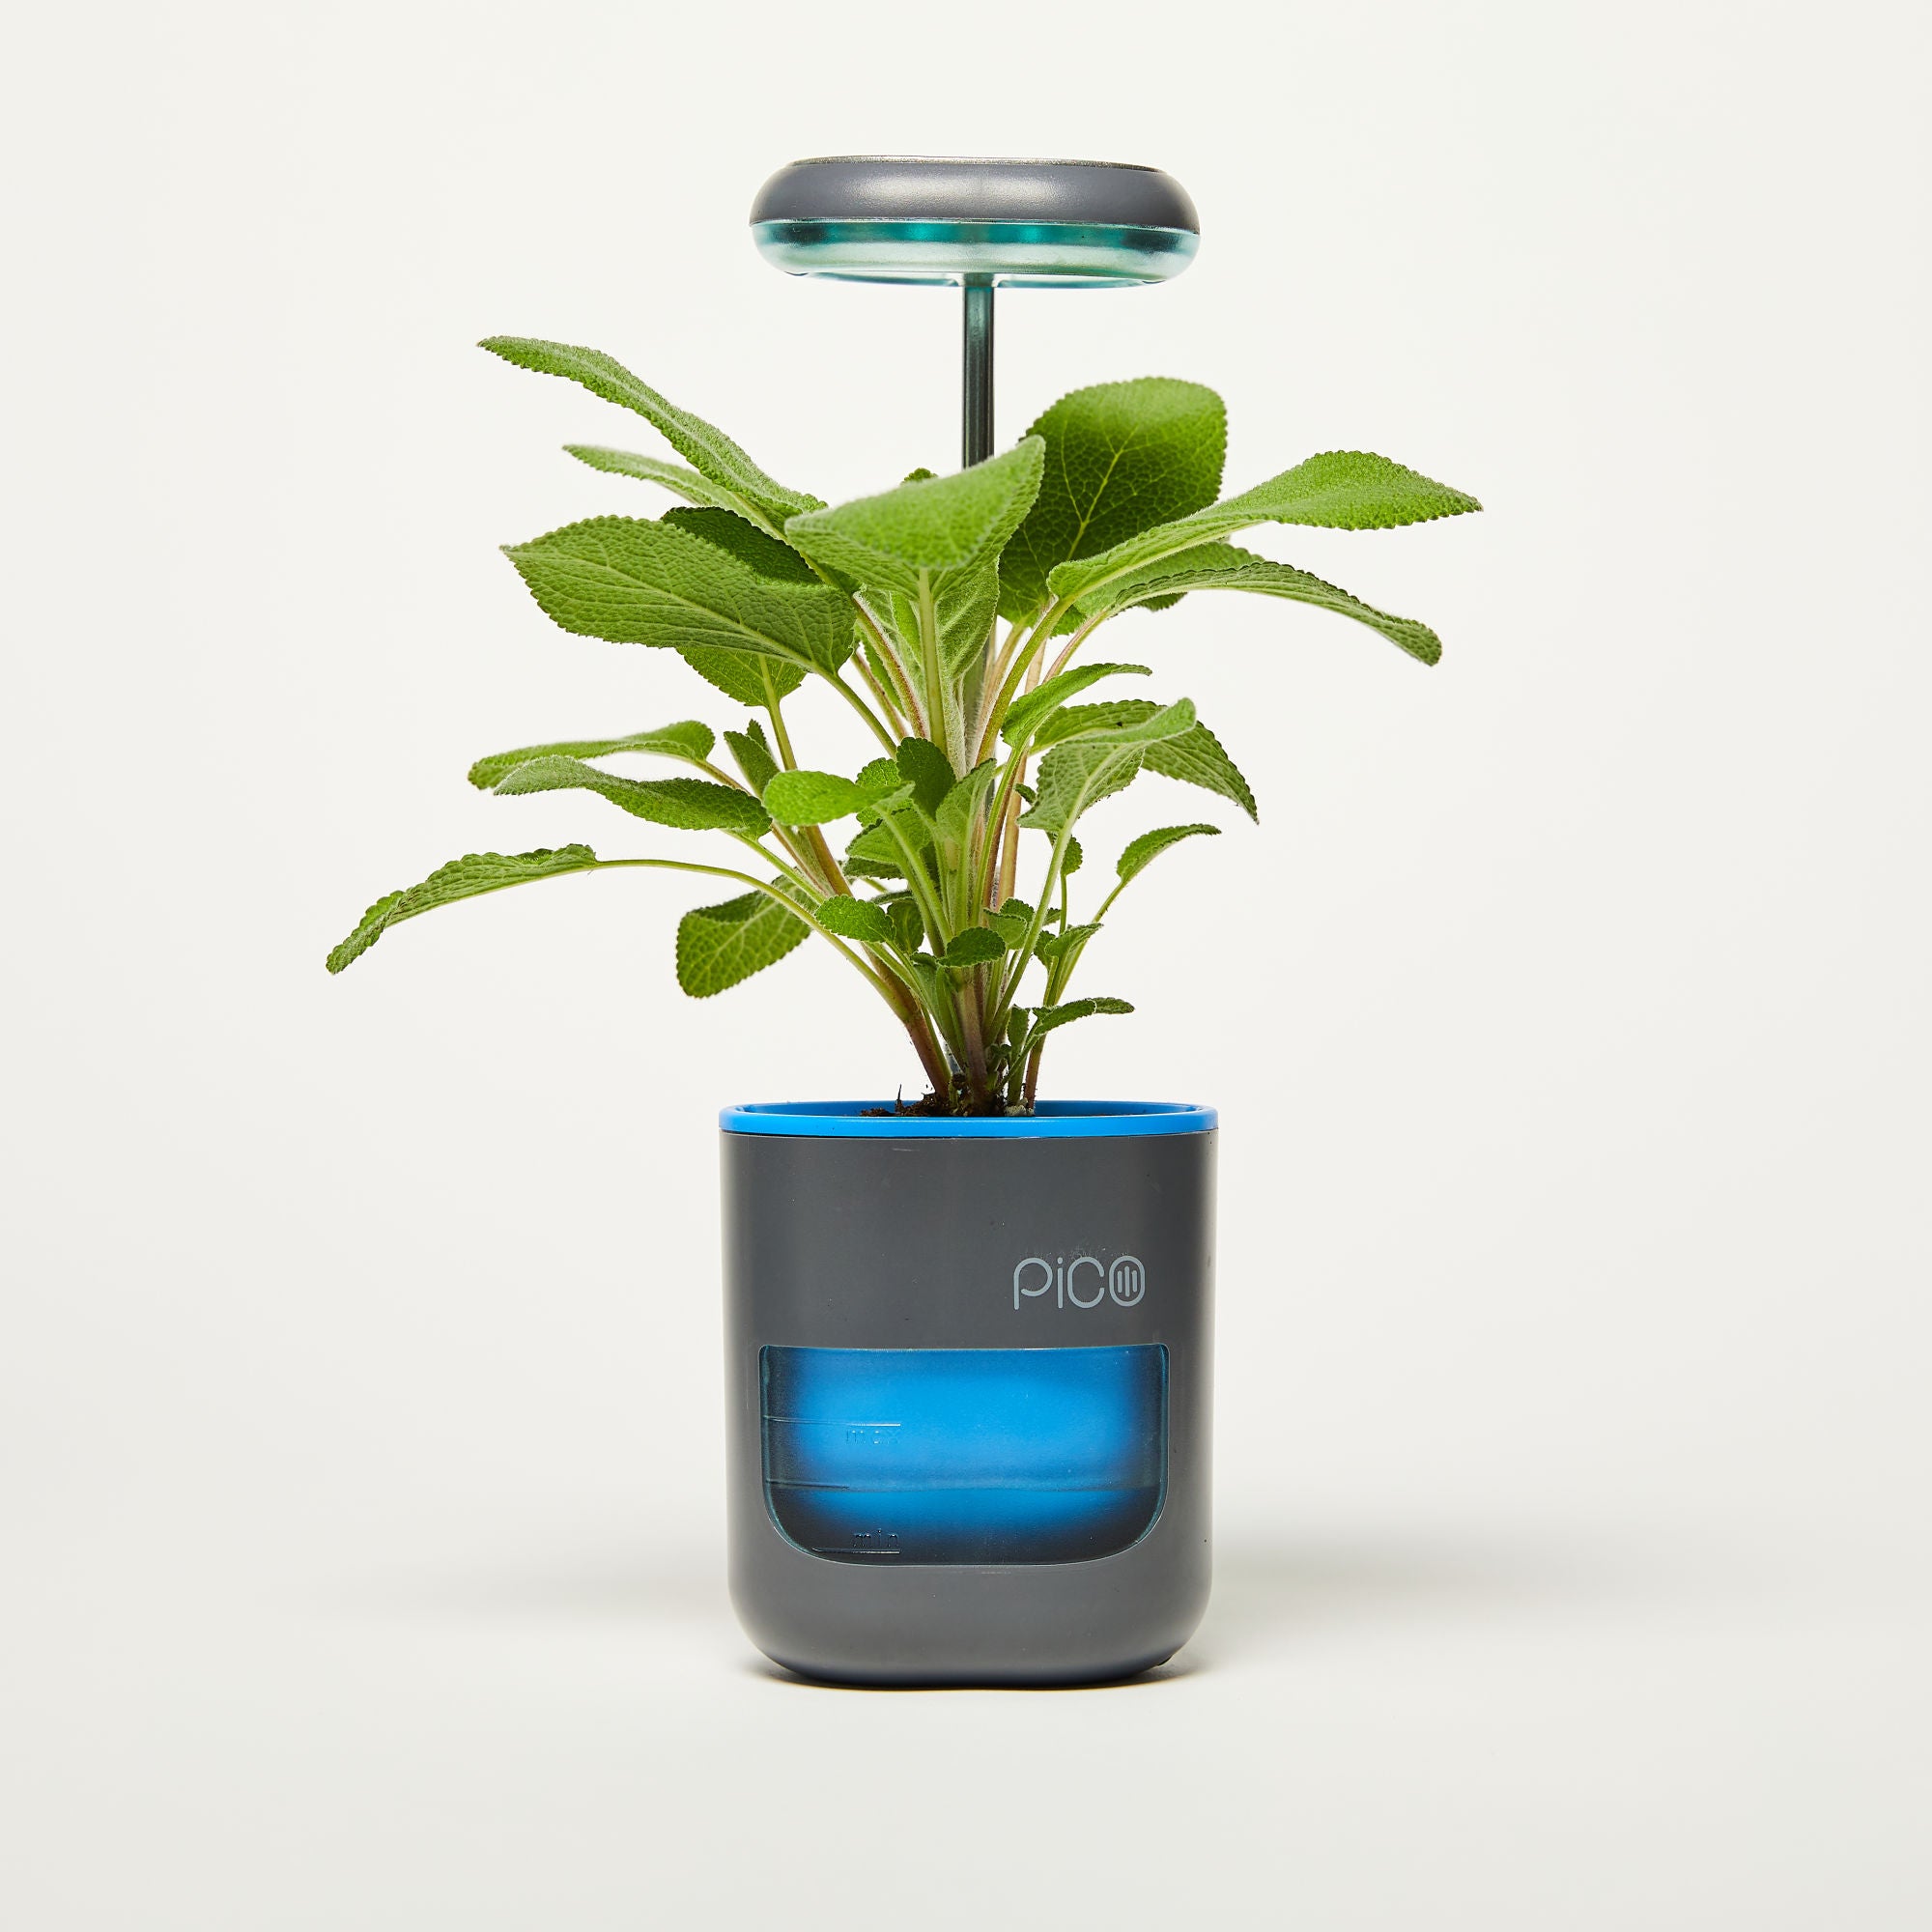 Pico Planter Indoor Garden with Plant Grow Light. This Herb Growing Kit is the Perfect Self Watering Planter. An Indoor Garden for Your Home and Office. Grow with Soil or Soil-Less Hydroponics.